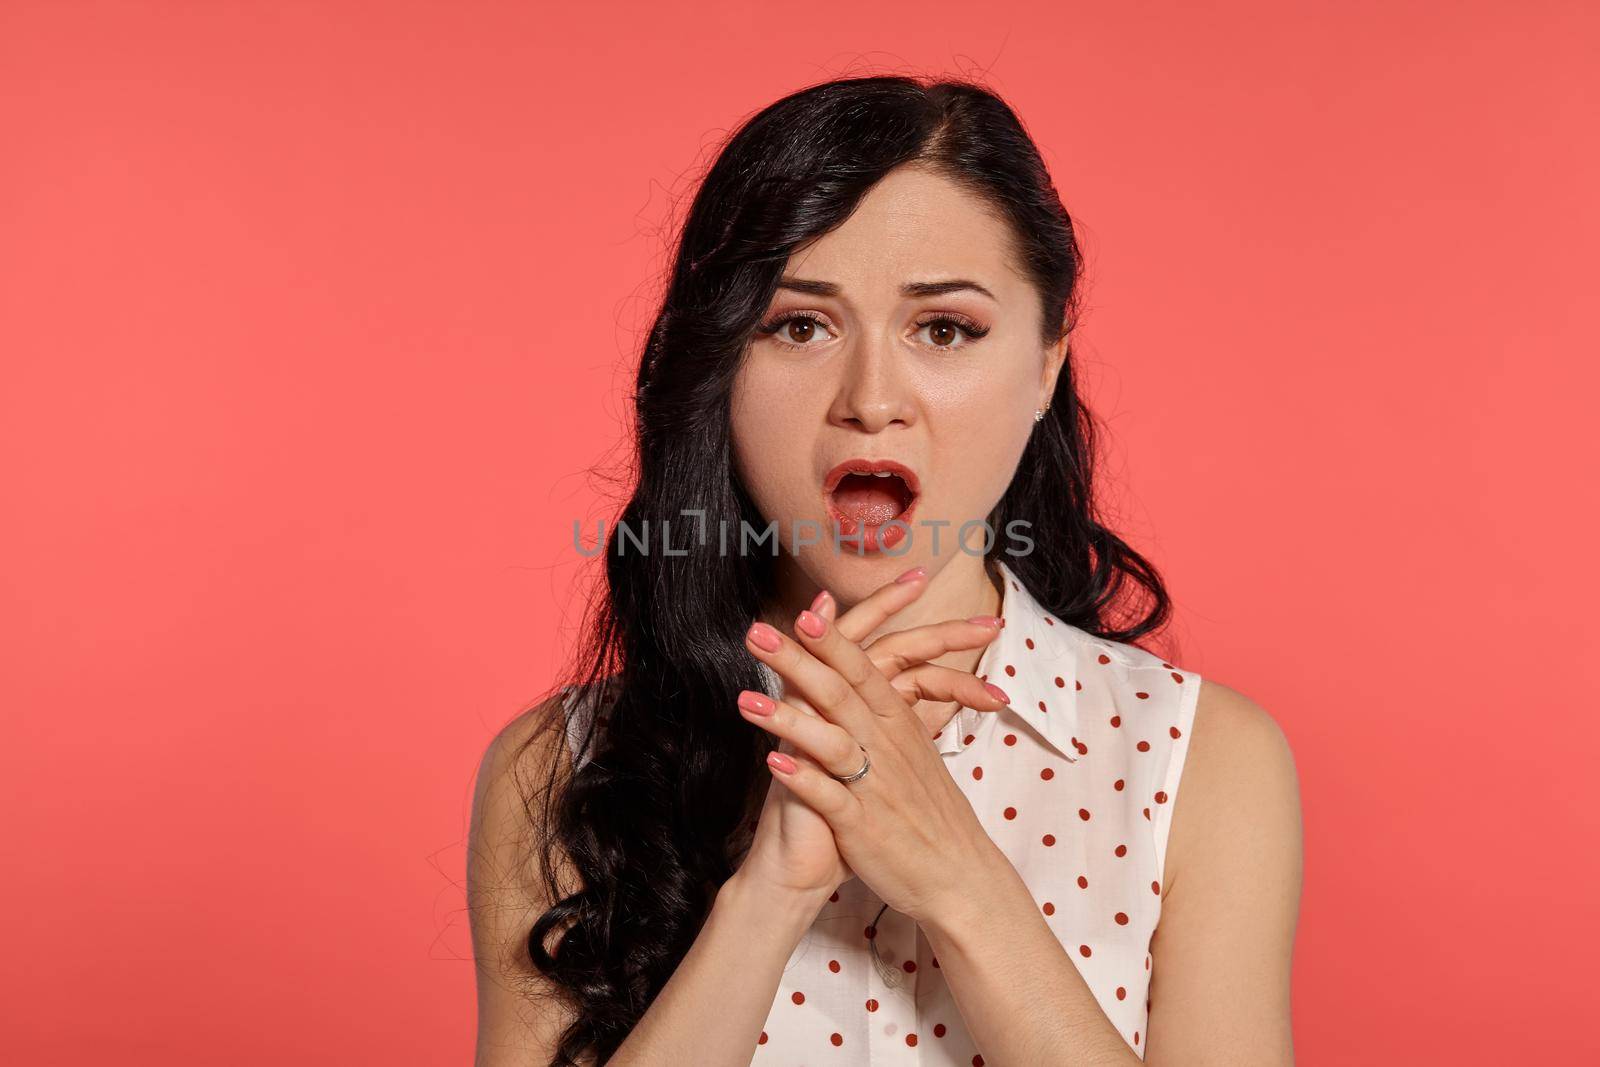 Close-up studio shot of a pretty teen lady, wearing casual white polka dot blouse. Little brunette female looking shocked posing over a pink background. People and sincere emotions.